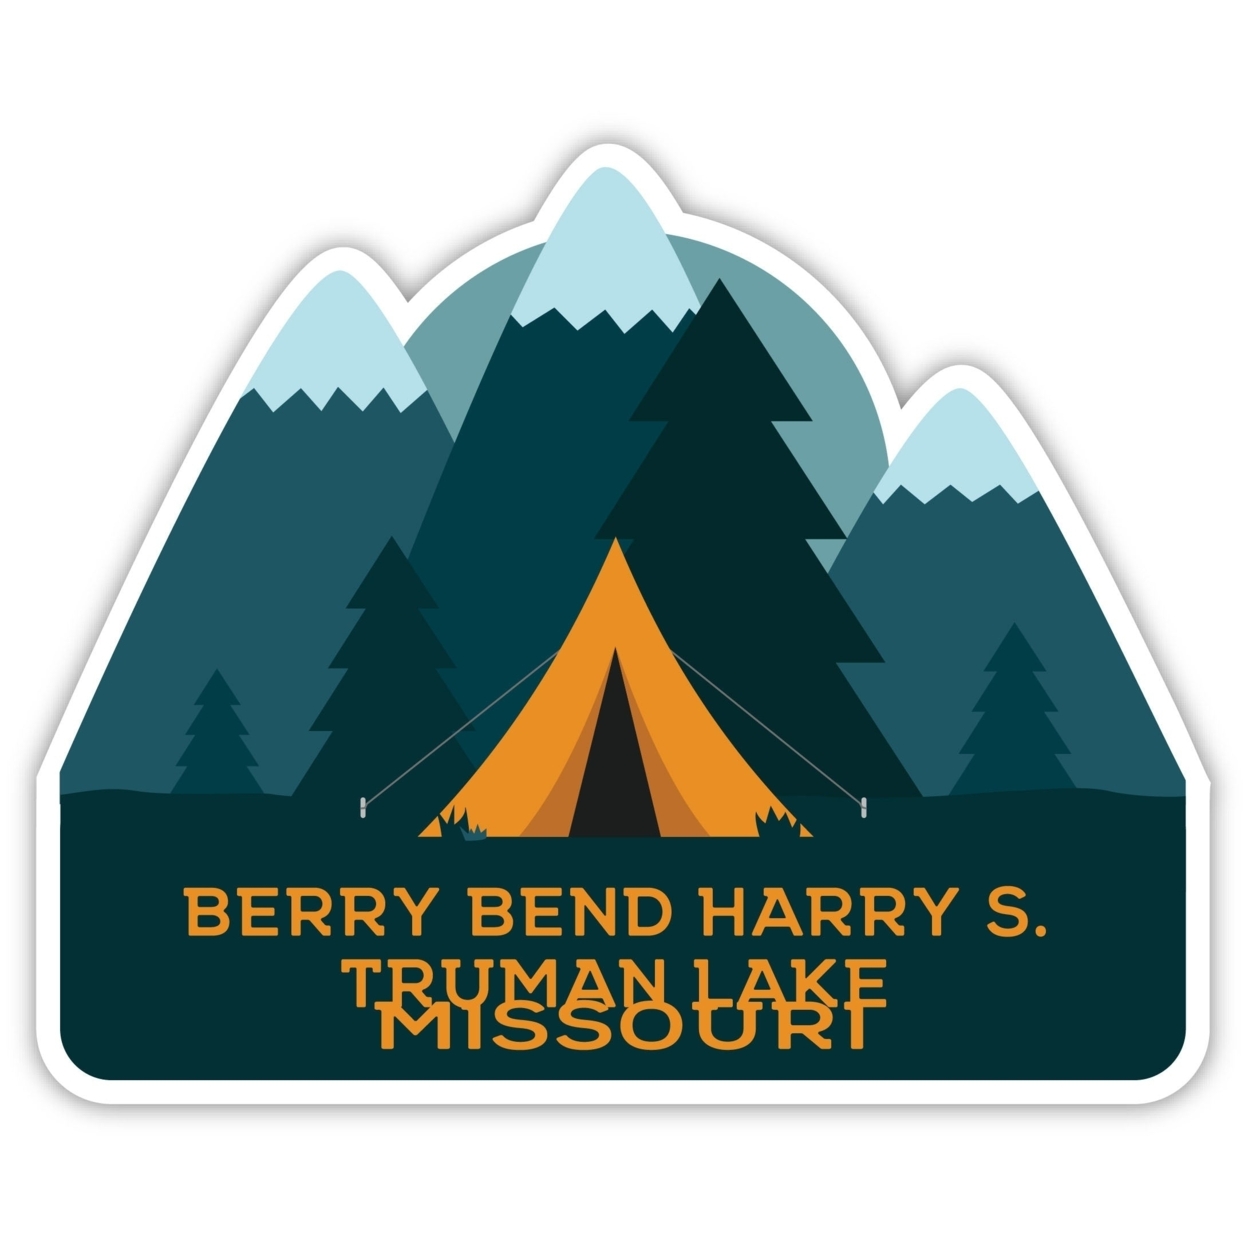 Berry Bend Harry S. Truman Lake Missouri Souvenir Decorative Stickers (Choose Theme And Size) - 4-Pack, 6-Inch, Tent